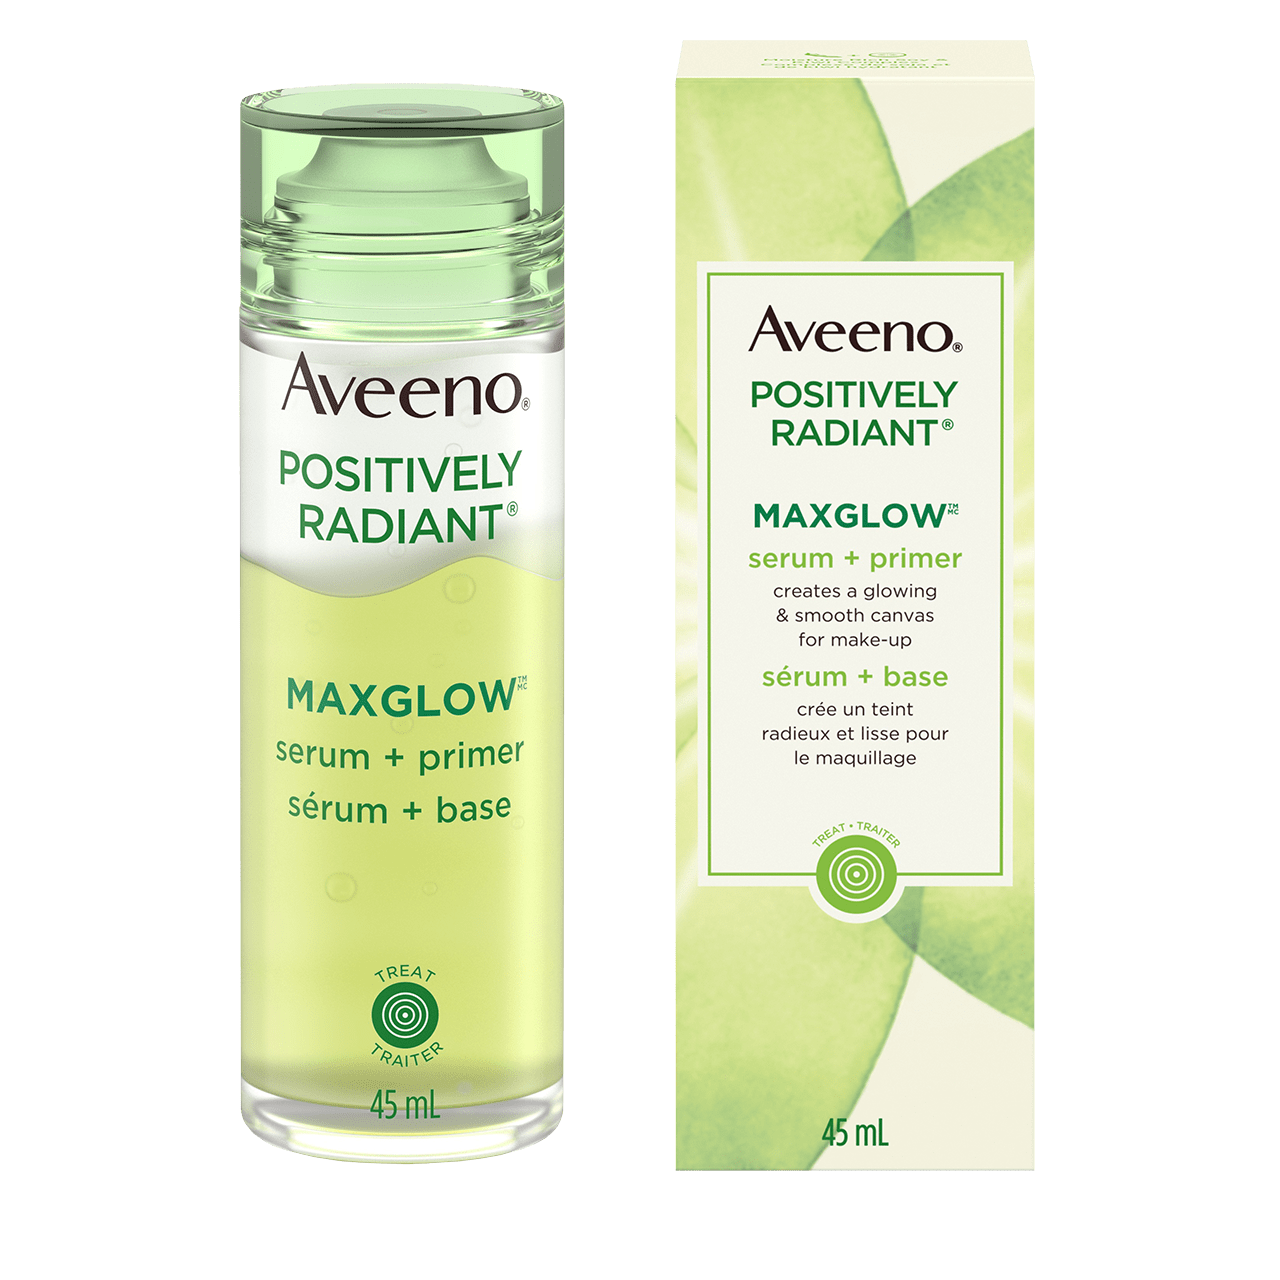 AVEENO® POSITIVELY RADIANT® MAXGLOW® Serum + Primer Packaging and Bottle, 45ml